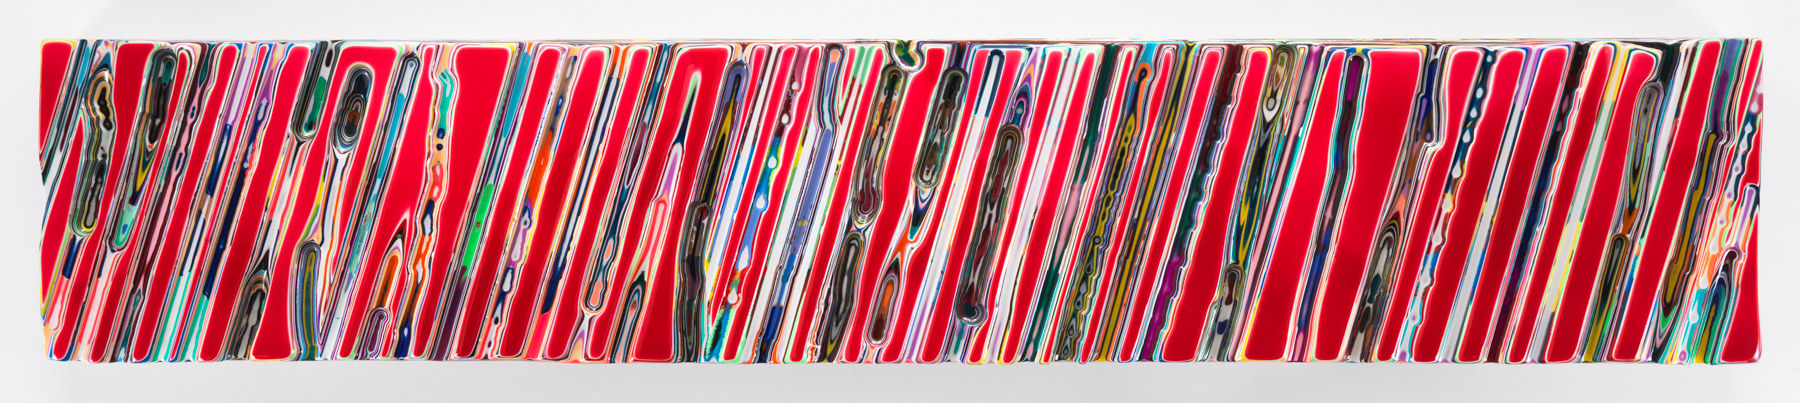 OHYEAHOHNOOHYES, 2016, Epoxy resin and pigments on wood, 18 x 96 inches, 45.7 x 243.8 cm, AMY#28366